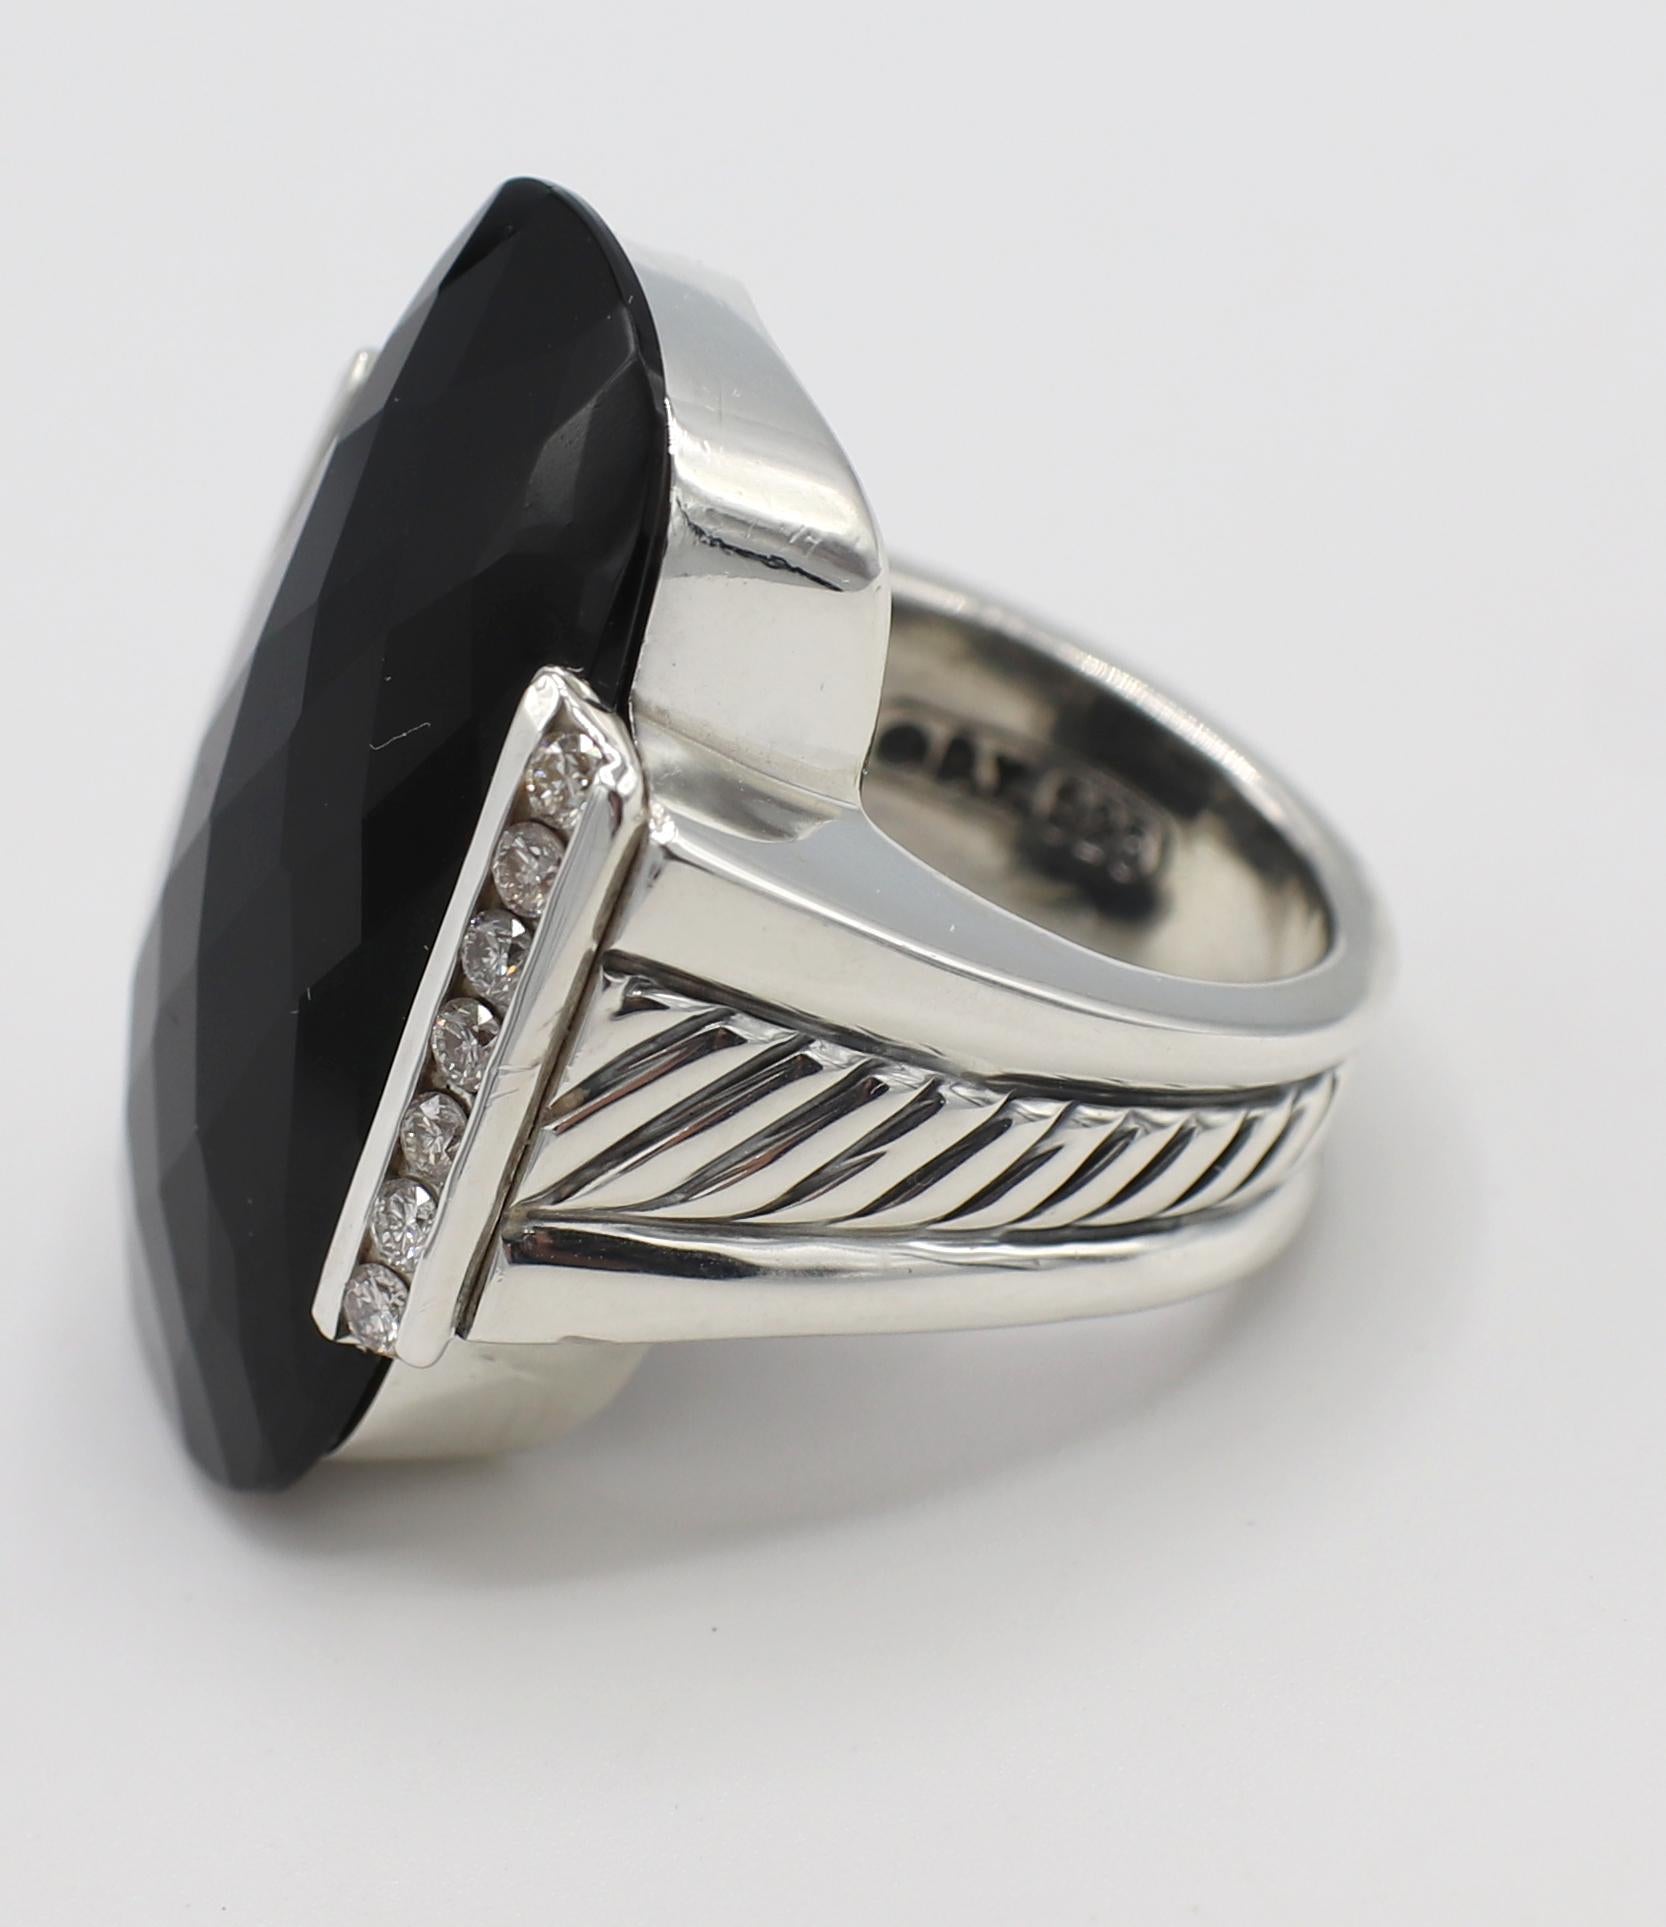 David Yurman Sterling Silver & Diamond Onyx Cocktail Ring 
Metal: Sterling silver
Weight: 16.81 grams
Top: 30 x 20.5mm 
Diamonds: Approx. .42 CTW G-H VS round diamonds
Size: 6 (US)
